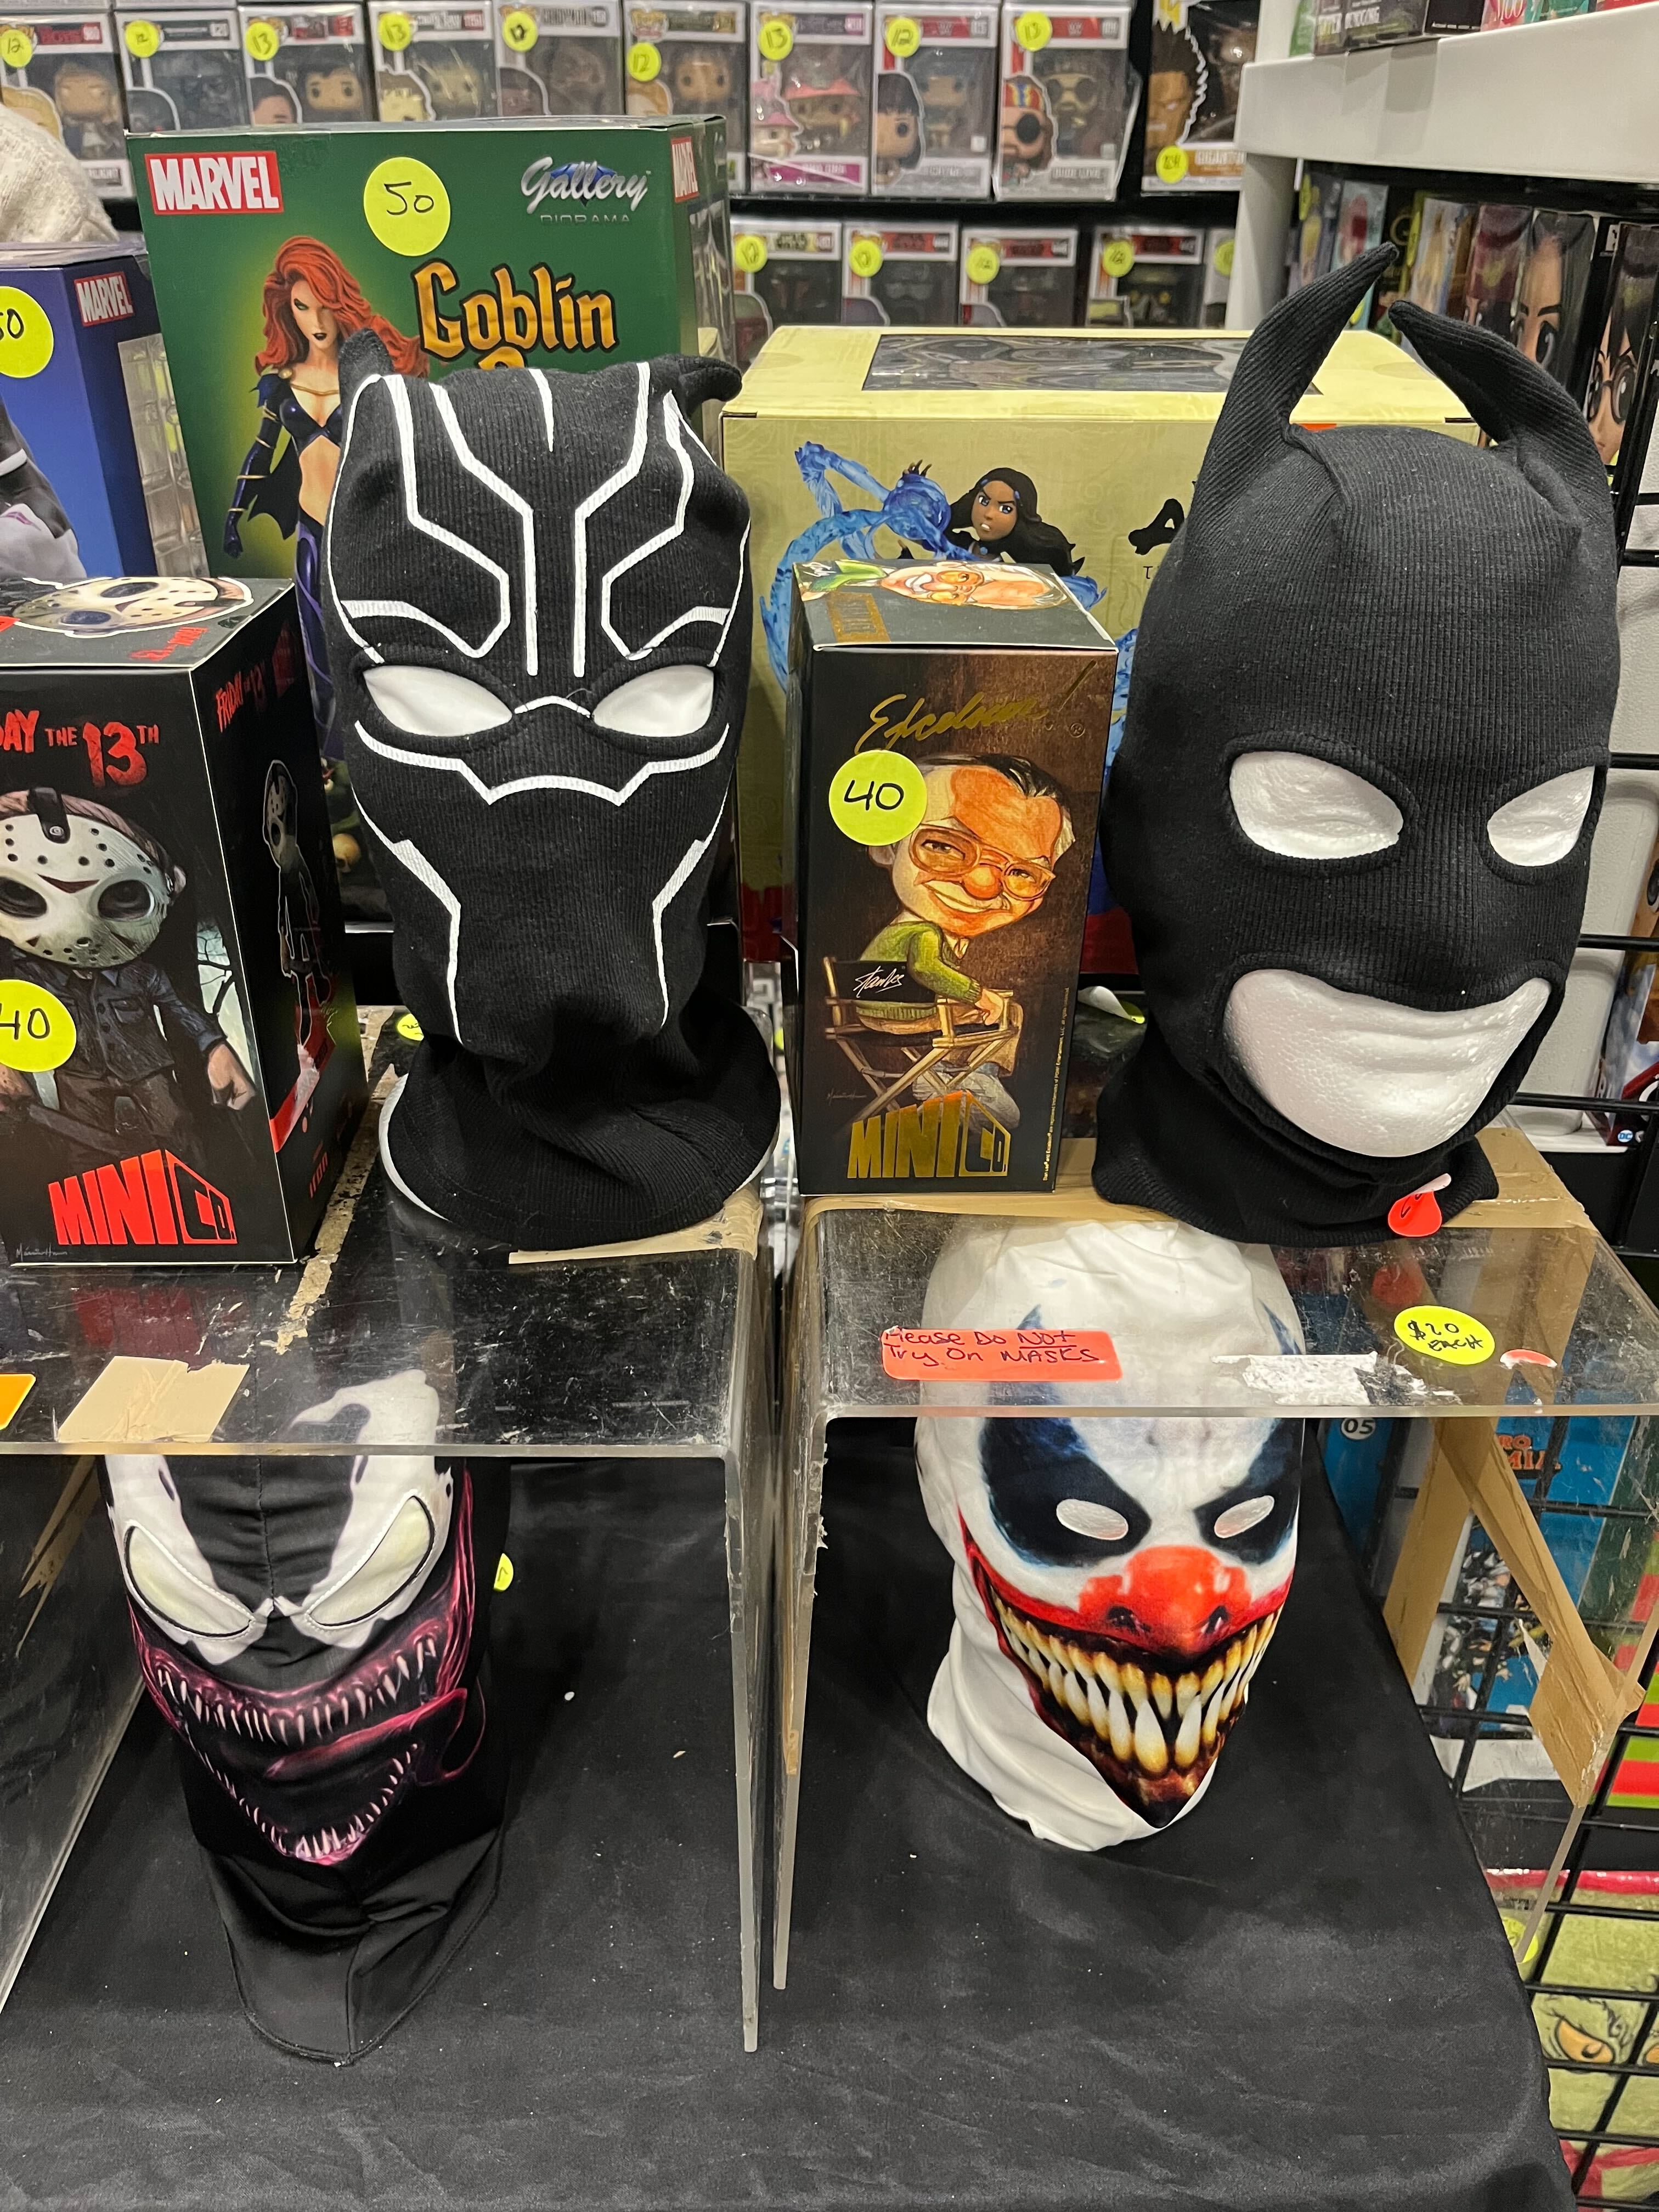 Things you can buy at comic con - mask - 20 Marvel 13 40